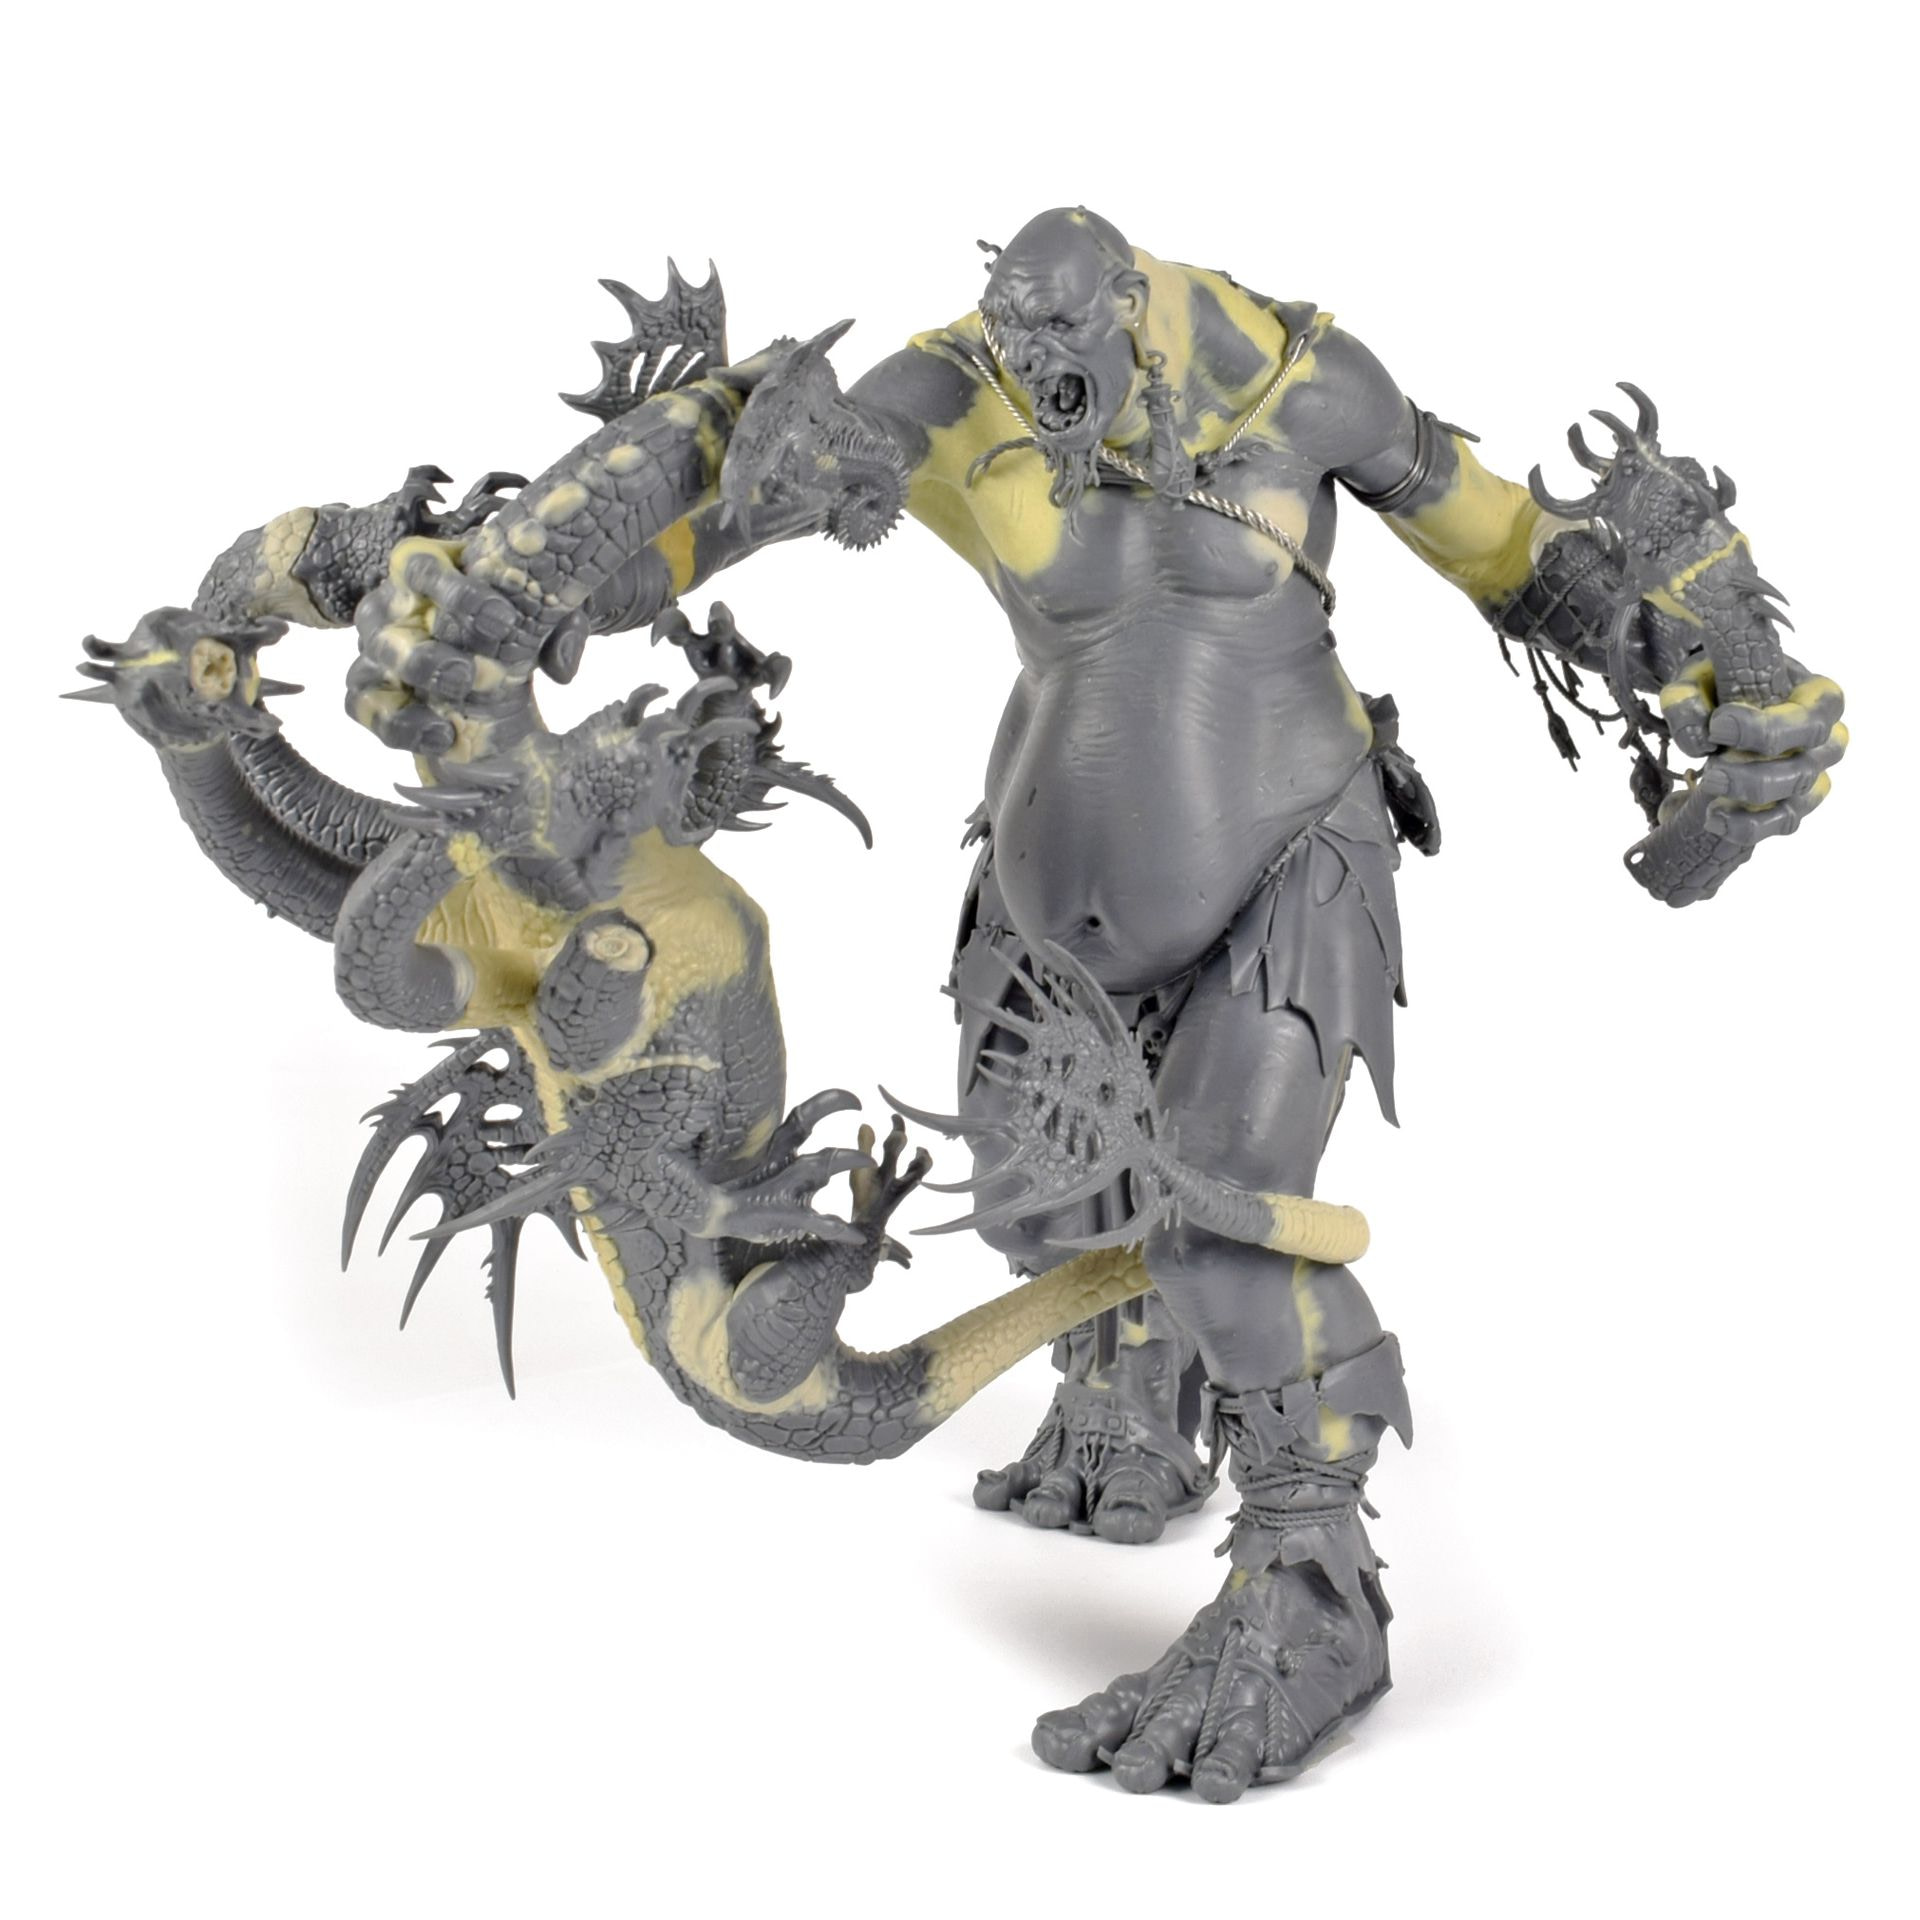 A figure of a giant fighting a kraken. This front-side view taken before painting shows how Chris Clayton has sculpted the textures on the joins between the kit-based plastic components.